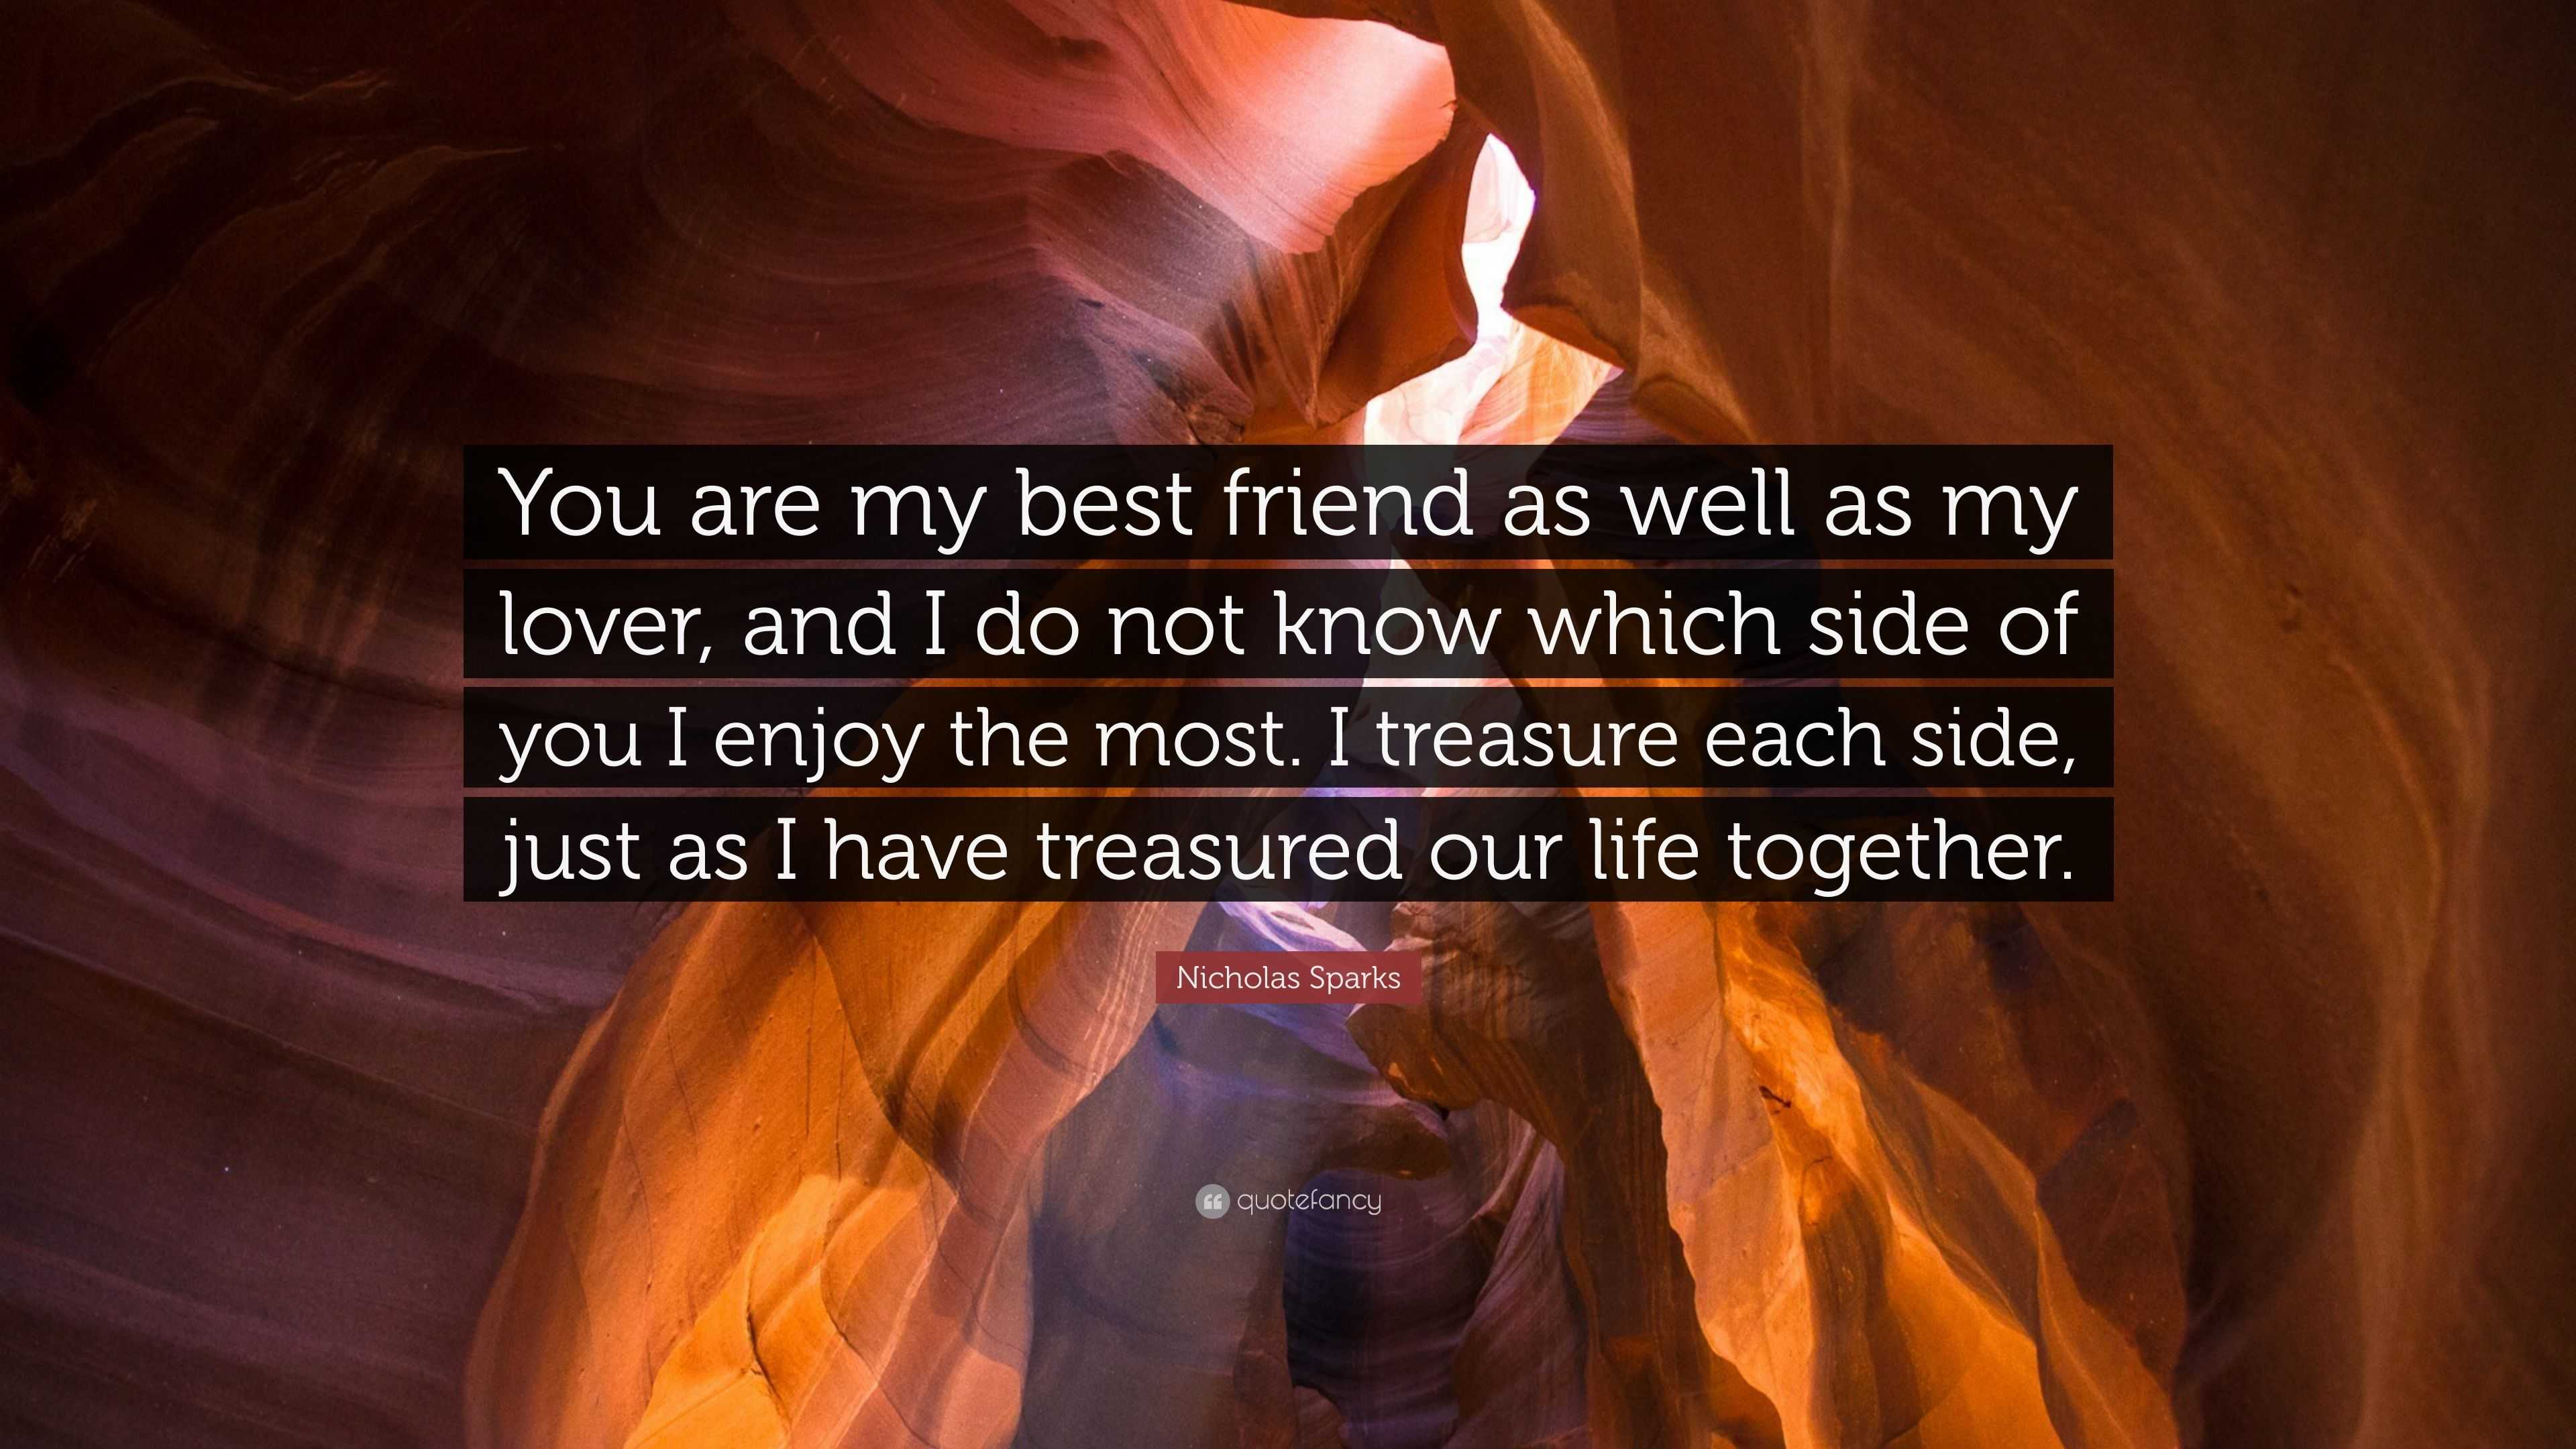 https://quotefancy.com/media/wallpaper/3840x2160/2264657-Nicholas-Sparks-Quote-You-are-my-best-friend-as-well-as-my-lover.jpg